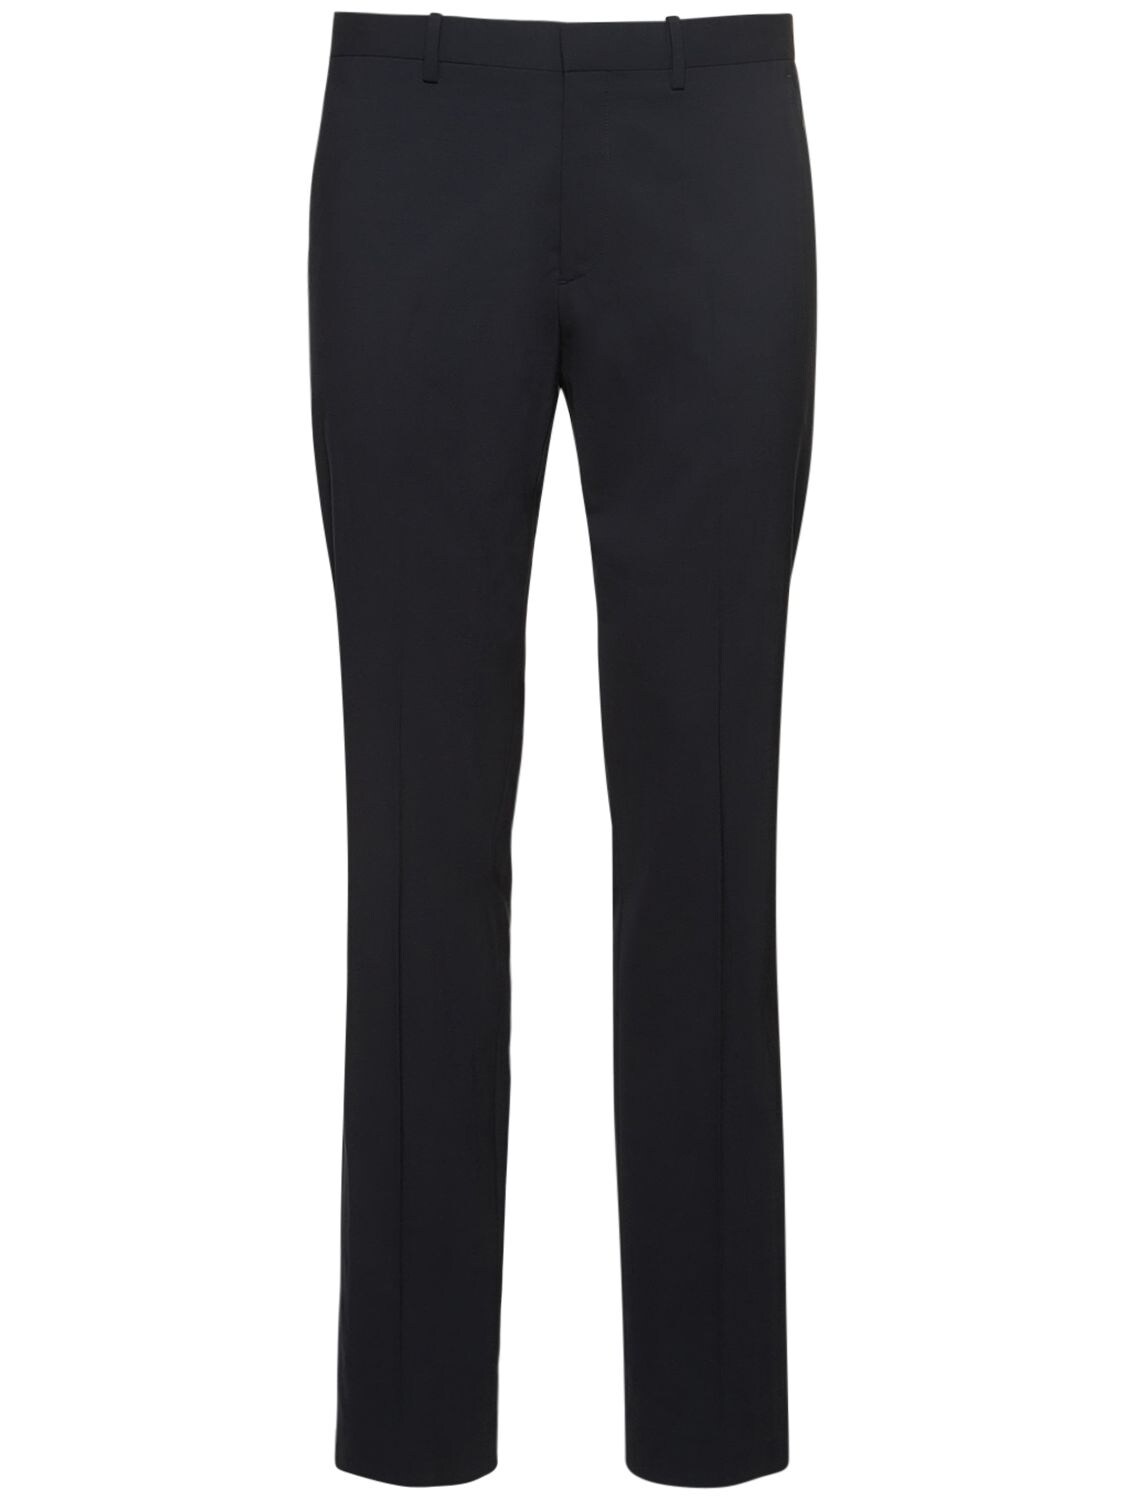 THEORY MAYER TAILORED trousers